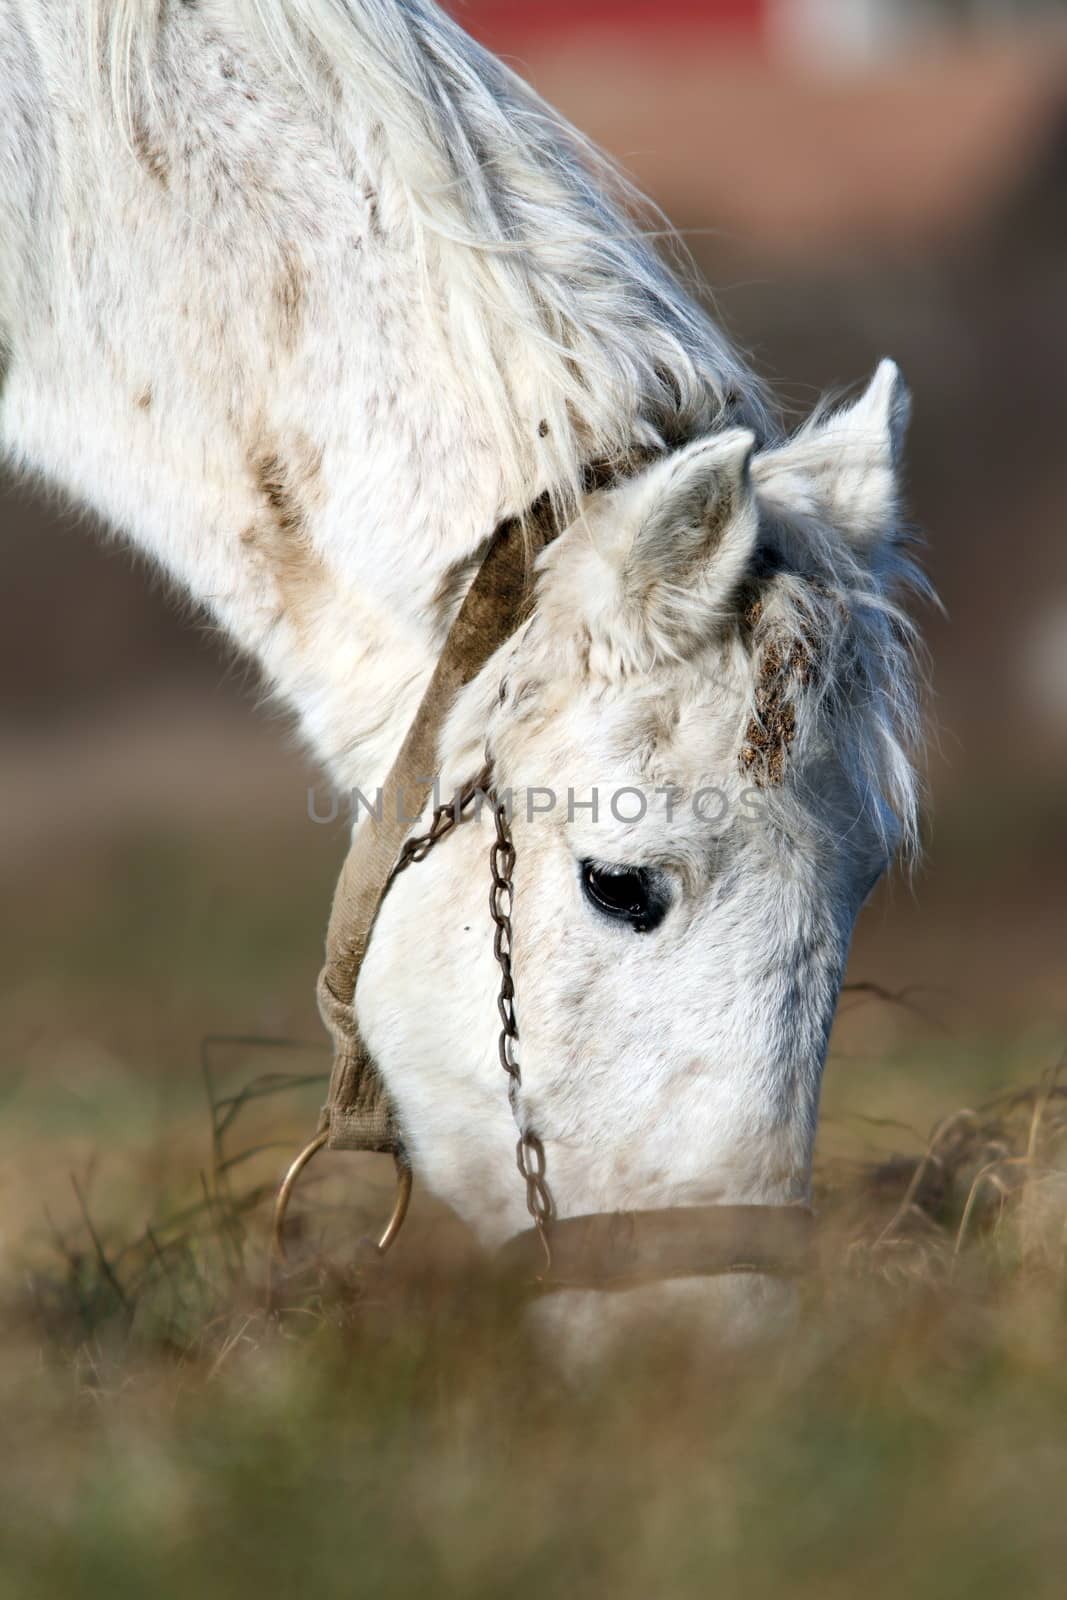 detail of white horse grazing by taviphoto